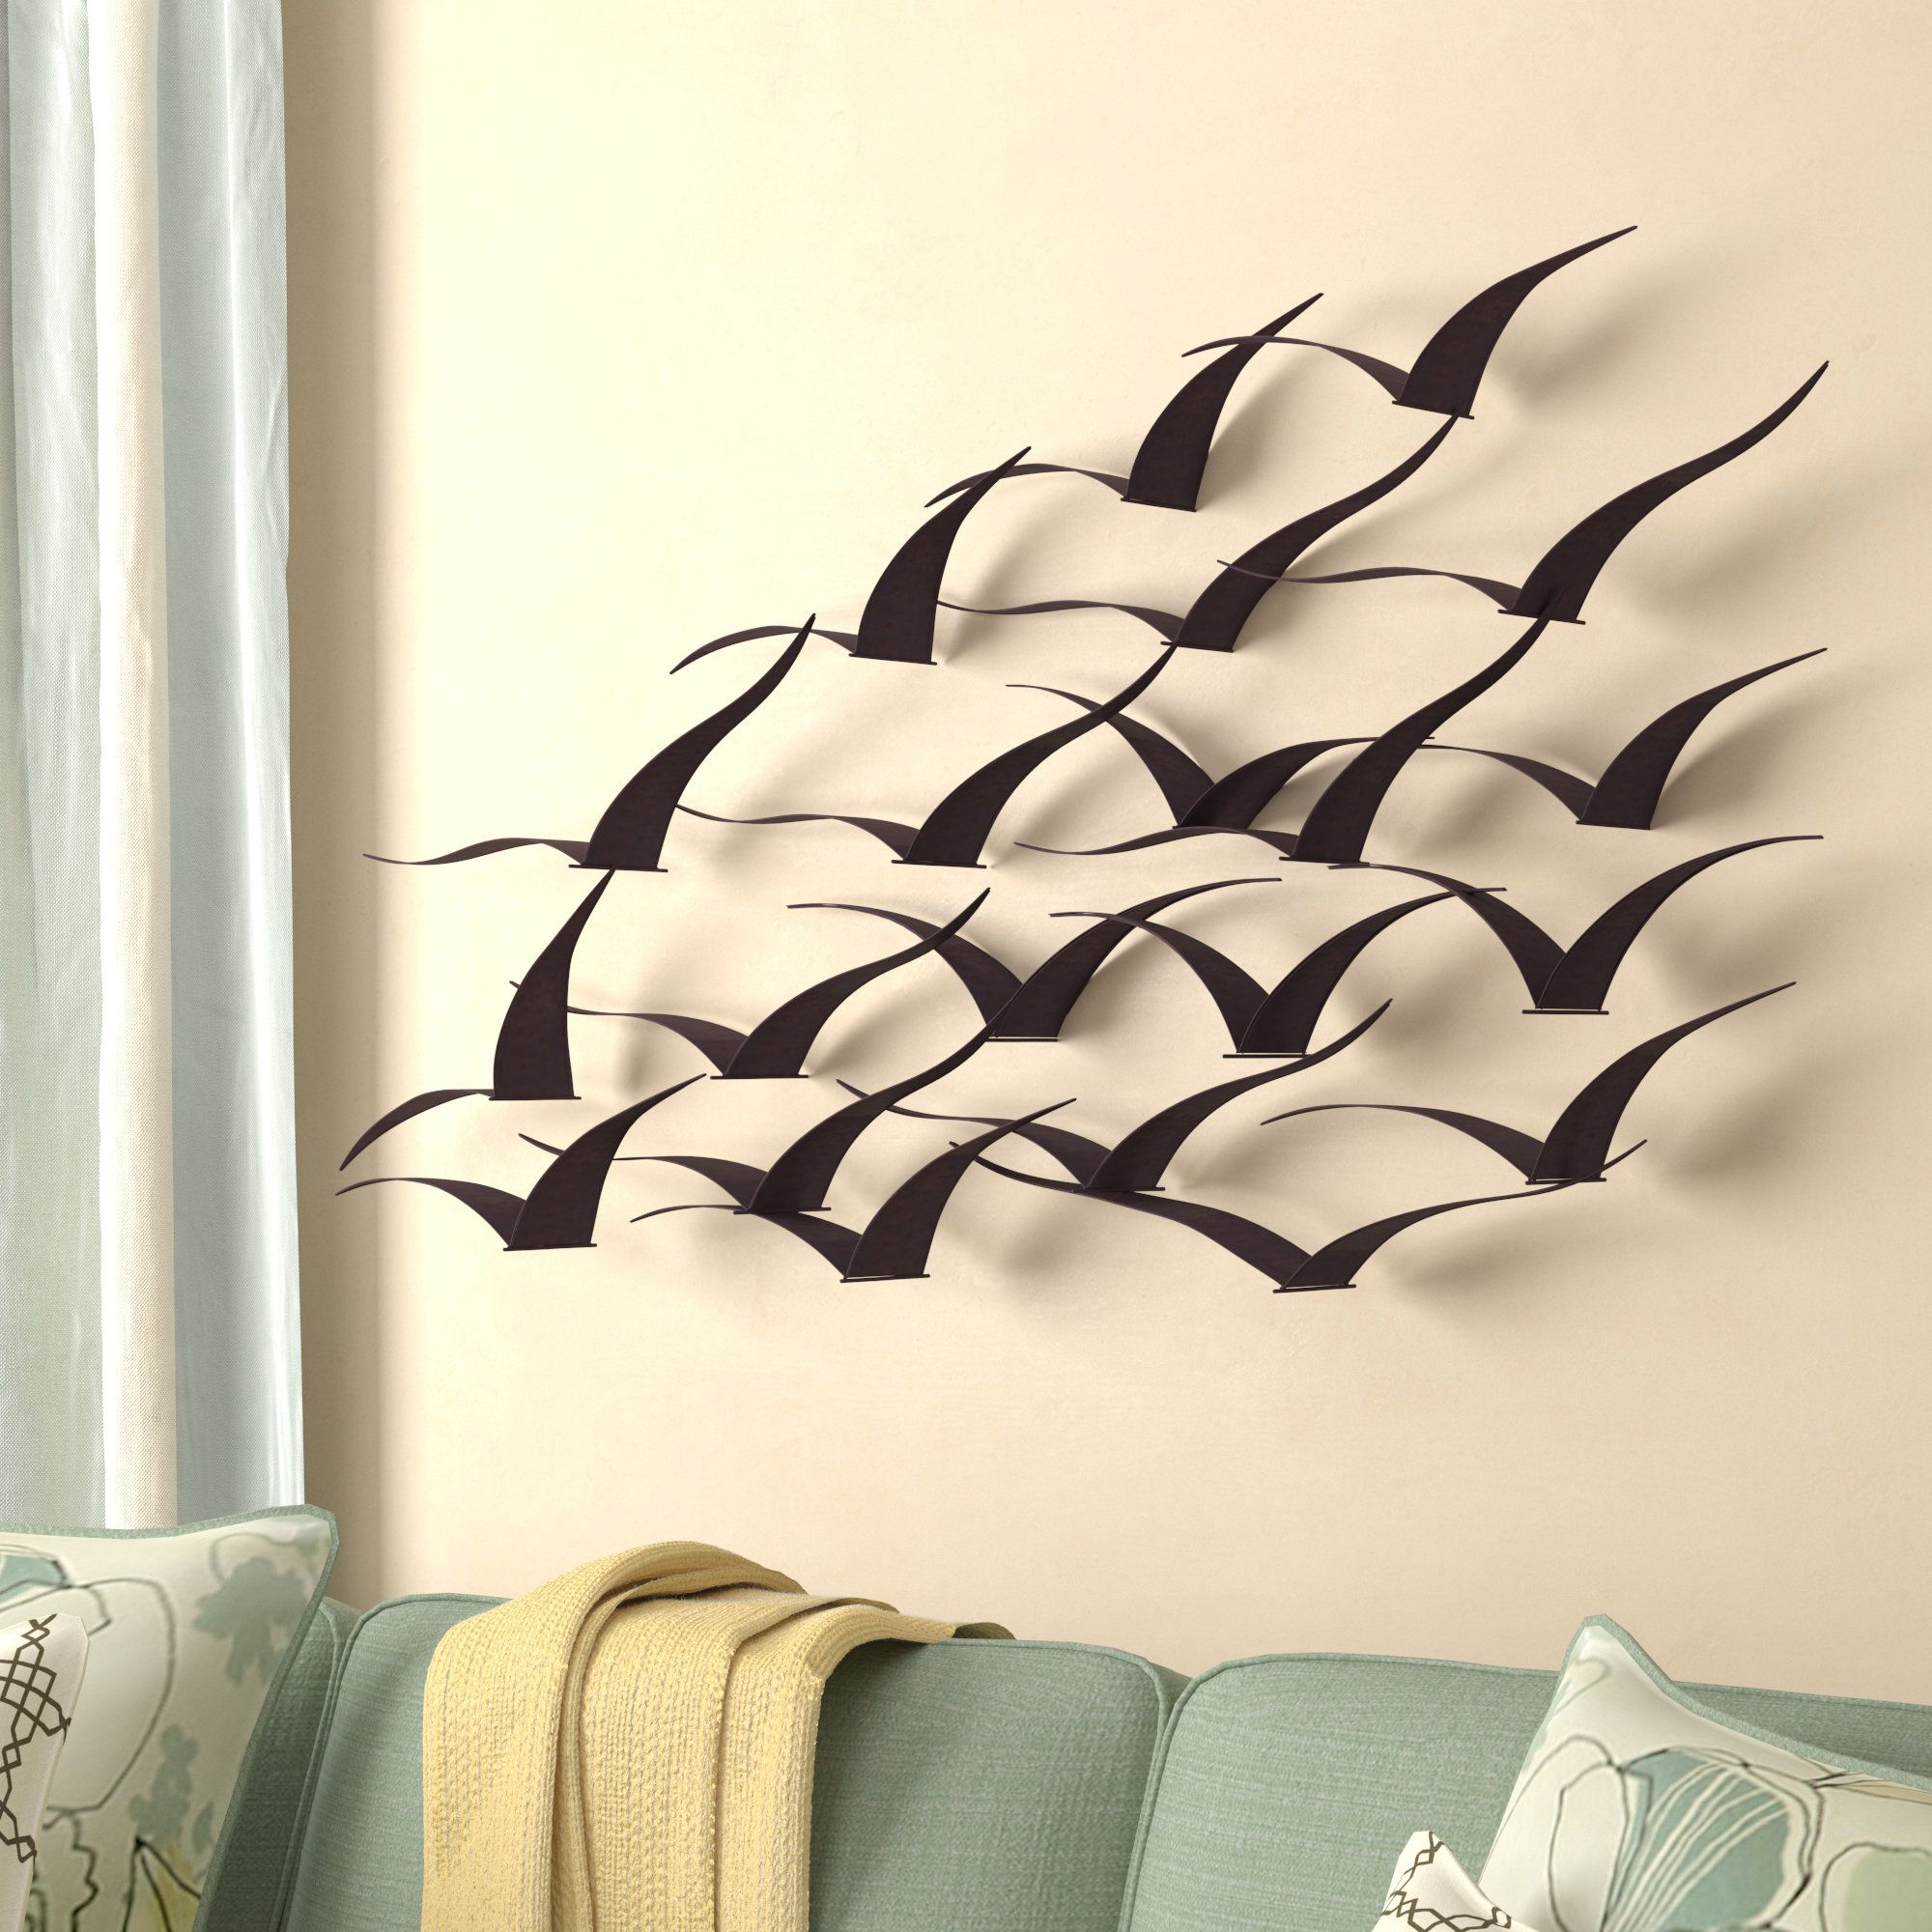 Metal Bird Wall Decor You'll Love In 2021 – Visualhunt Intended For Widely Used Large Wall Decor Ornaments (View 9 of 15)